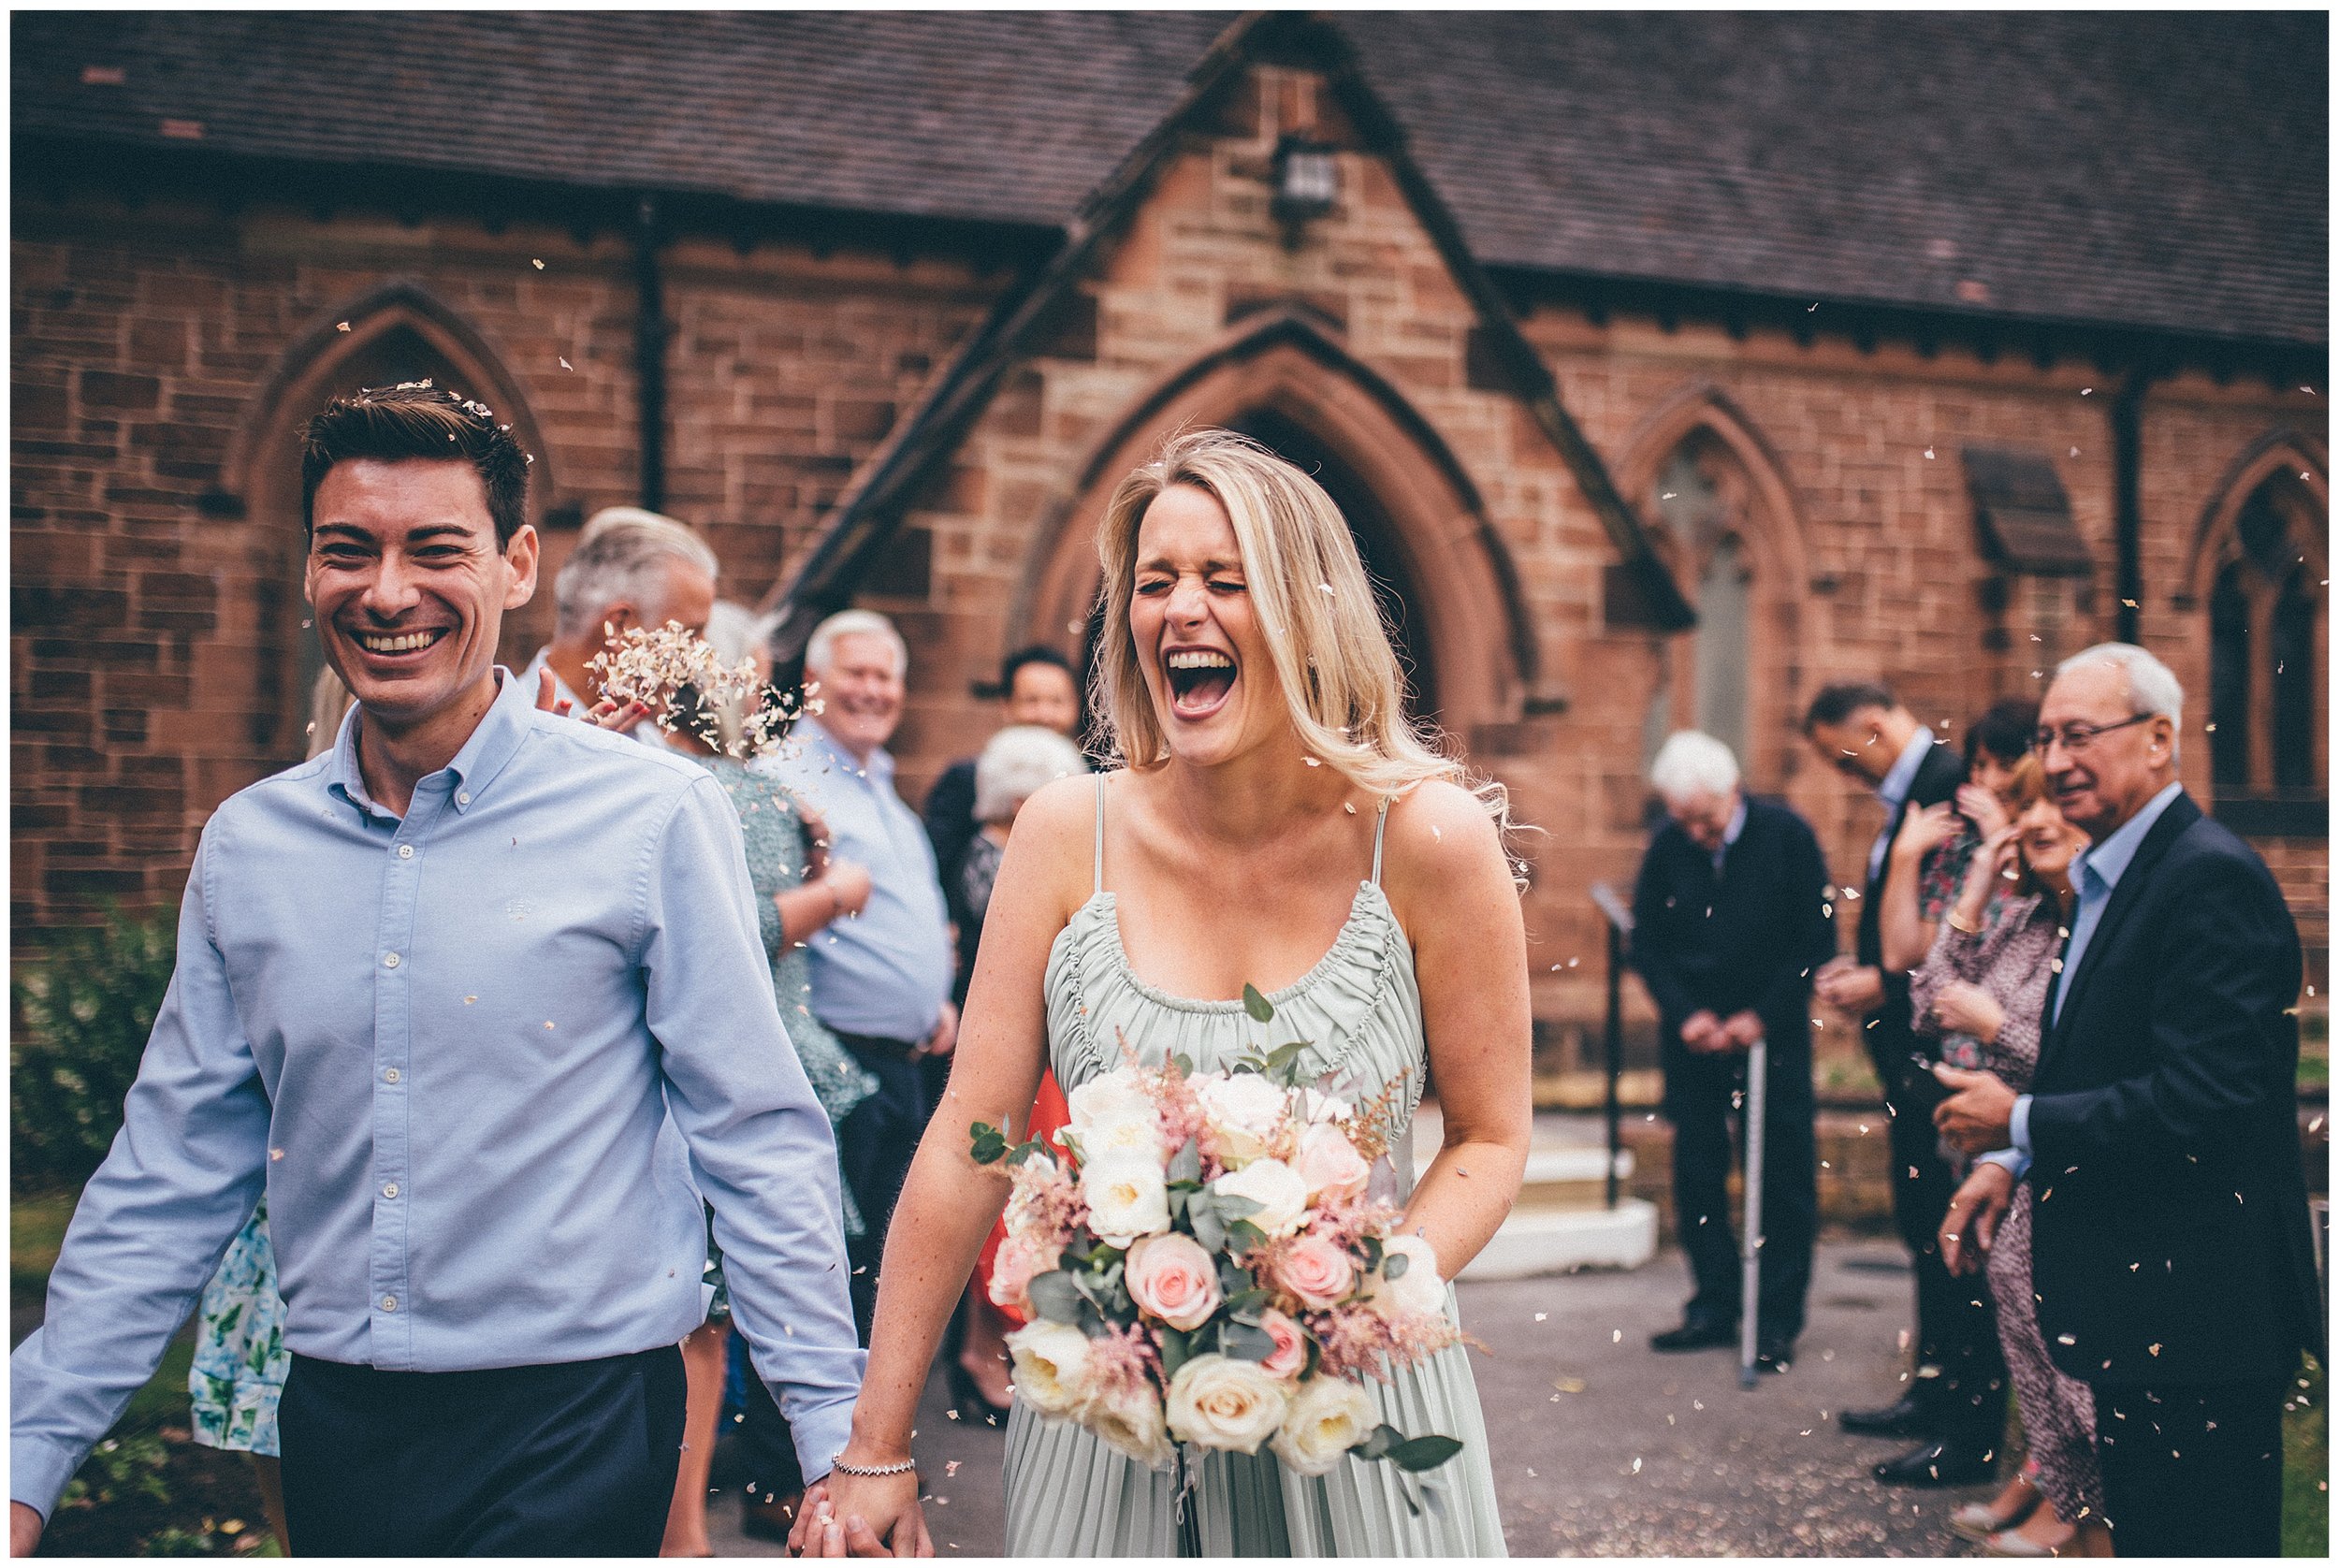 Bride beams after guests have thrown confetti over them during their covid wedding